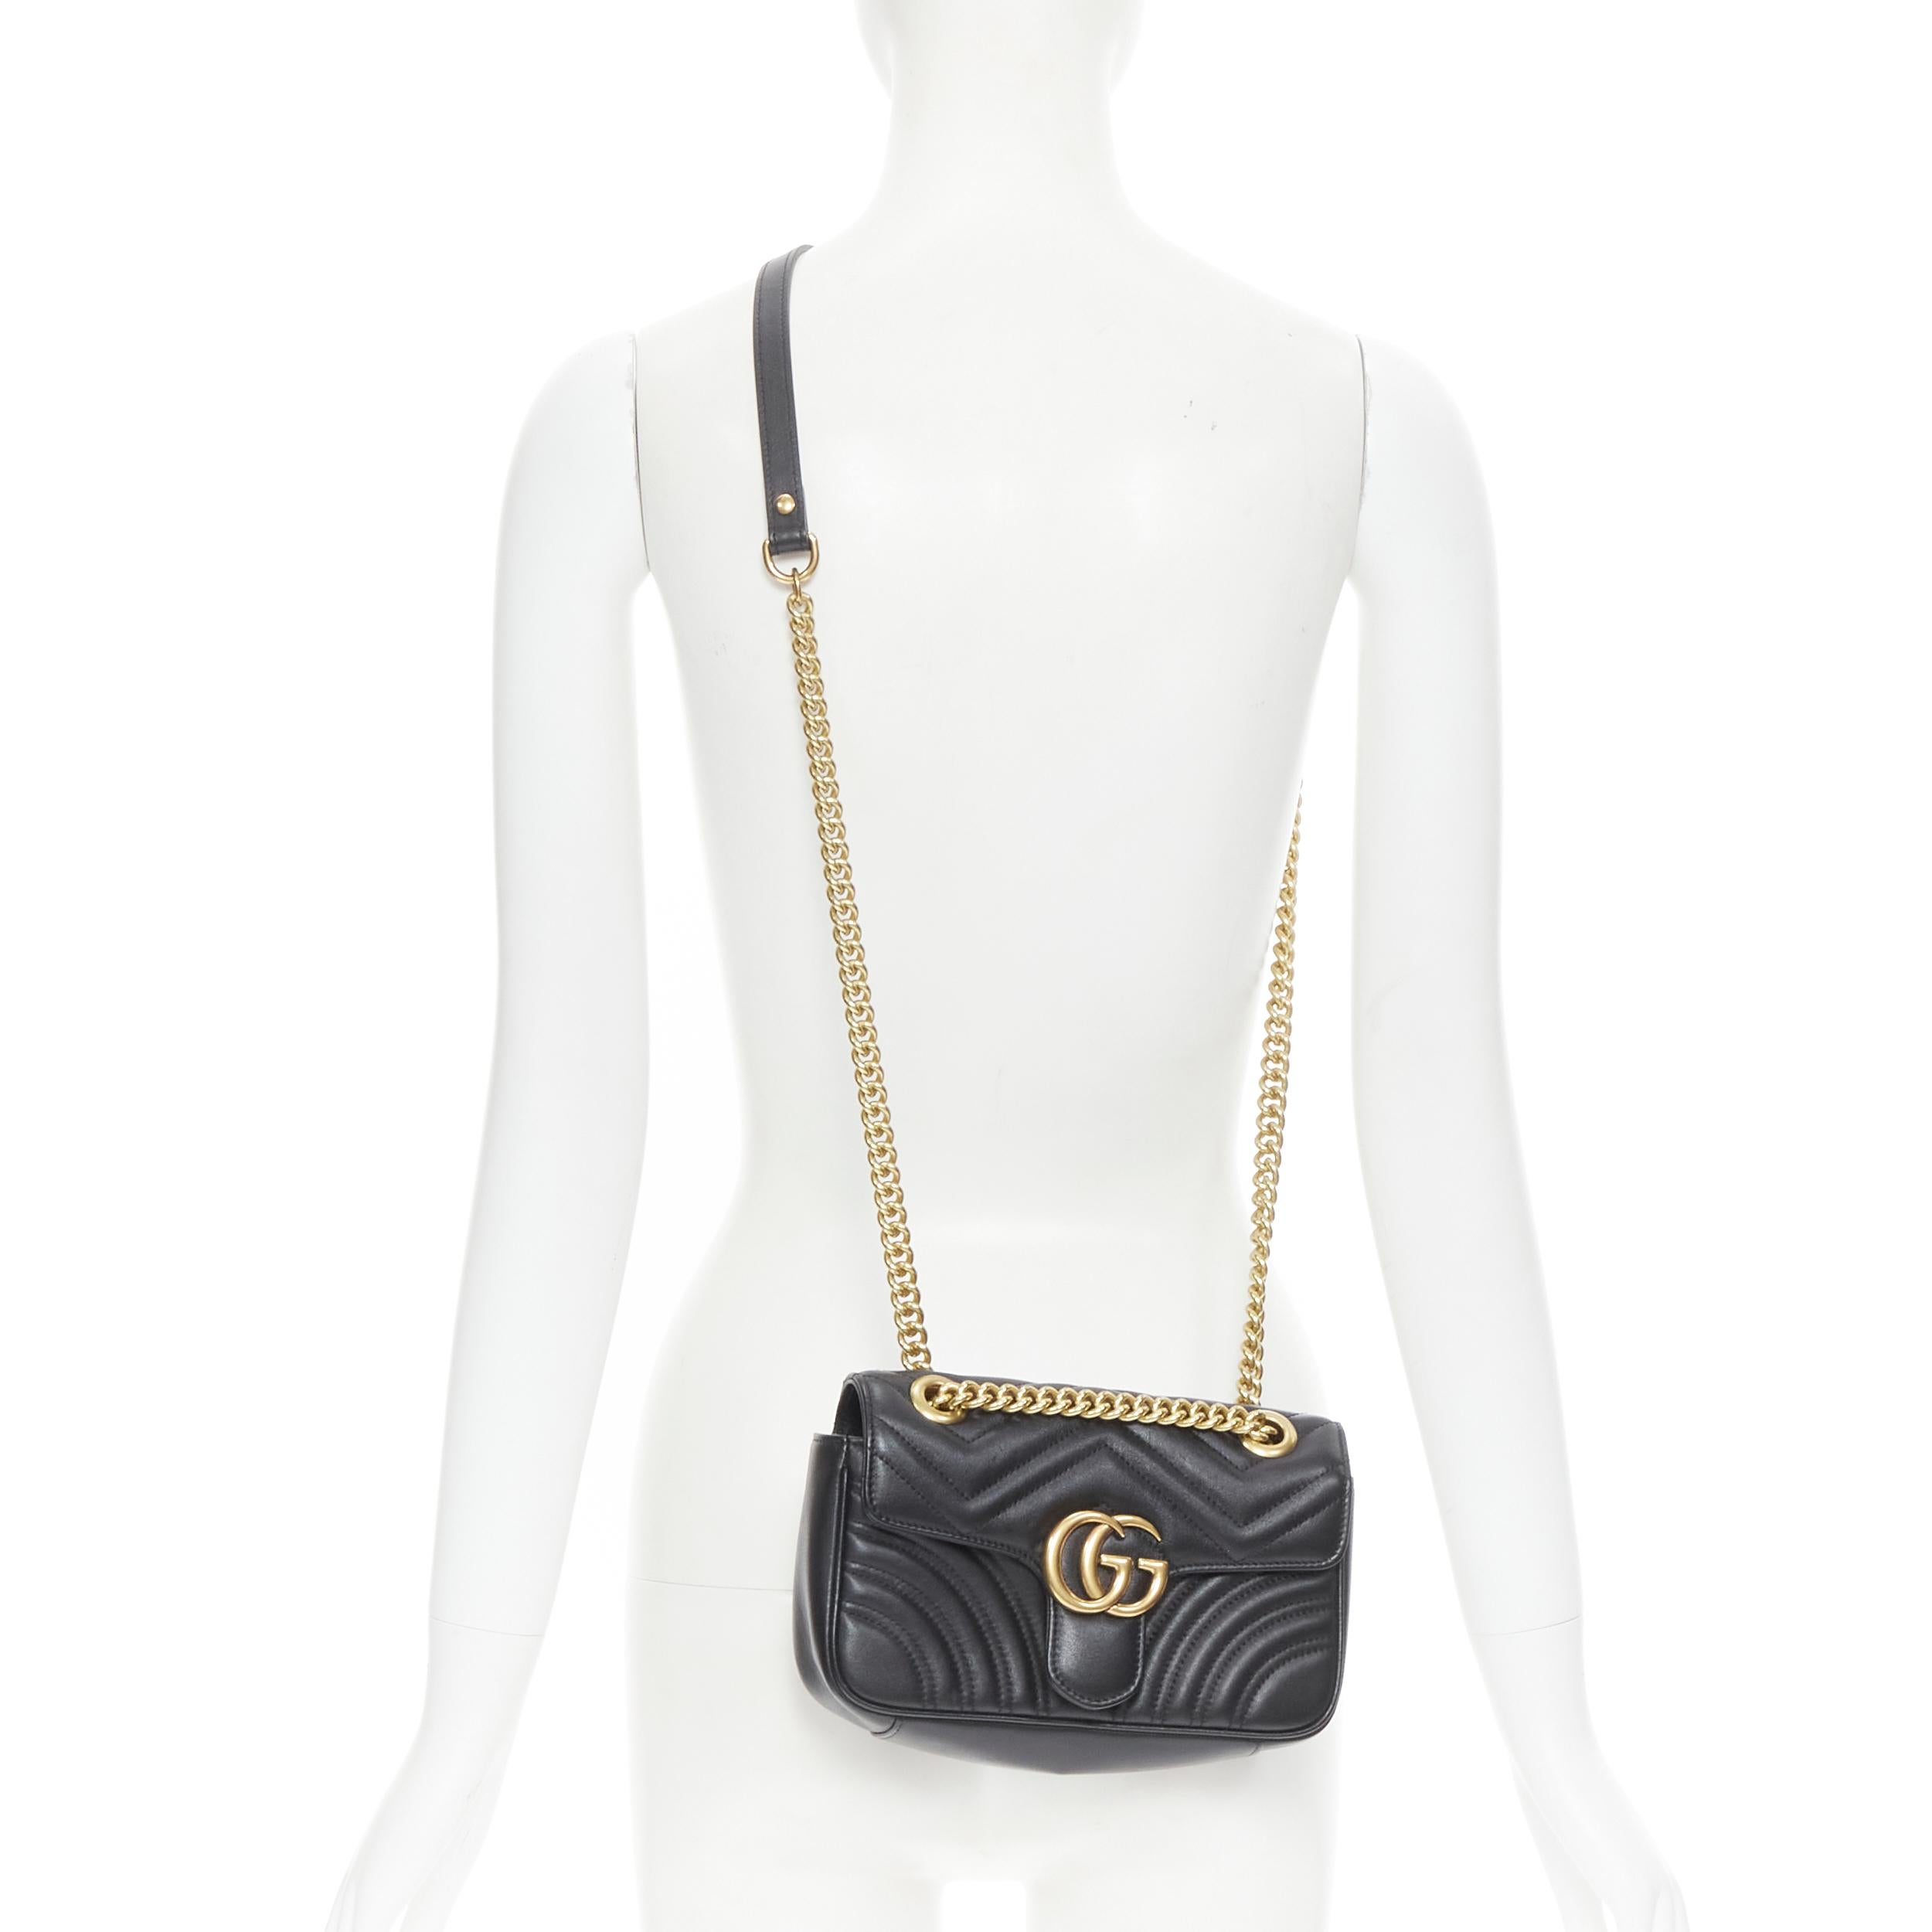 GUCCI Marmont Heart Matelasse gold GG logo flap chain shoulder bag 
Reference: TGAS/B00988 
Brand: Gucci 
Designer: Alessandro Michele 
Model: 446744 170701 
Material: Leather 
Color: Black 
Pattern: Solid 
Closure: Clasp 
Extra Detail: GG Marmont